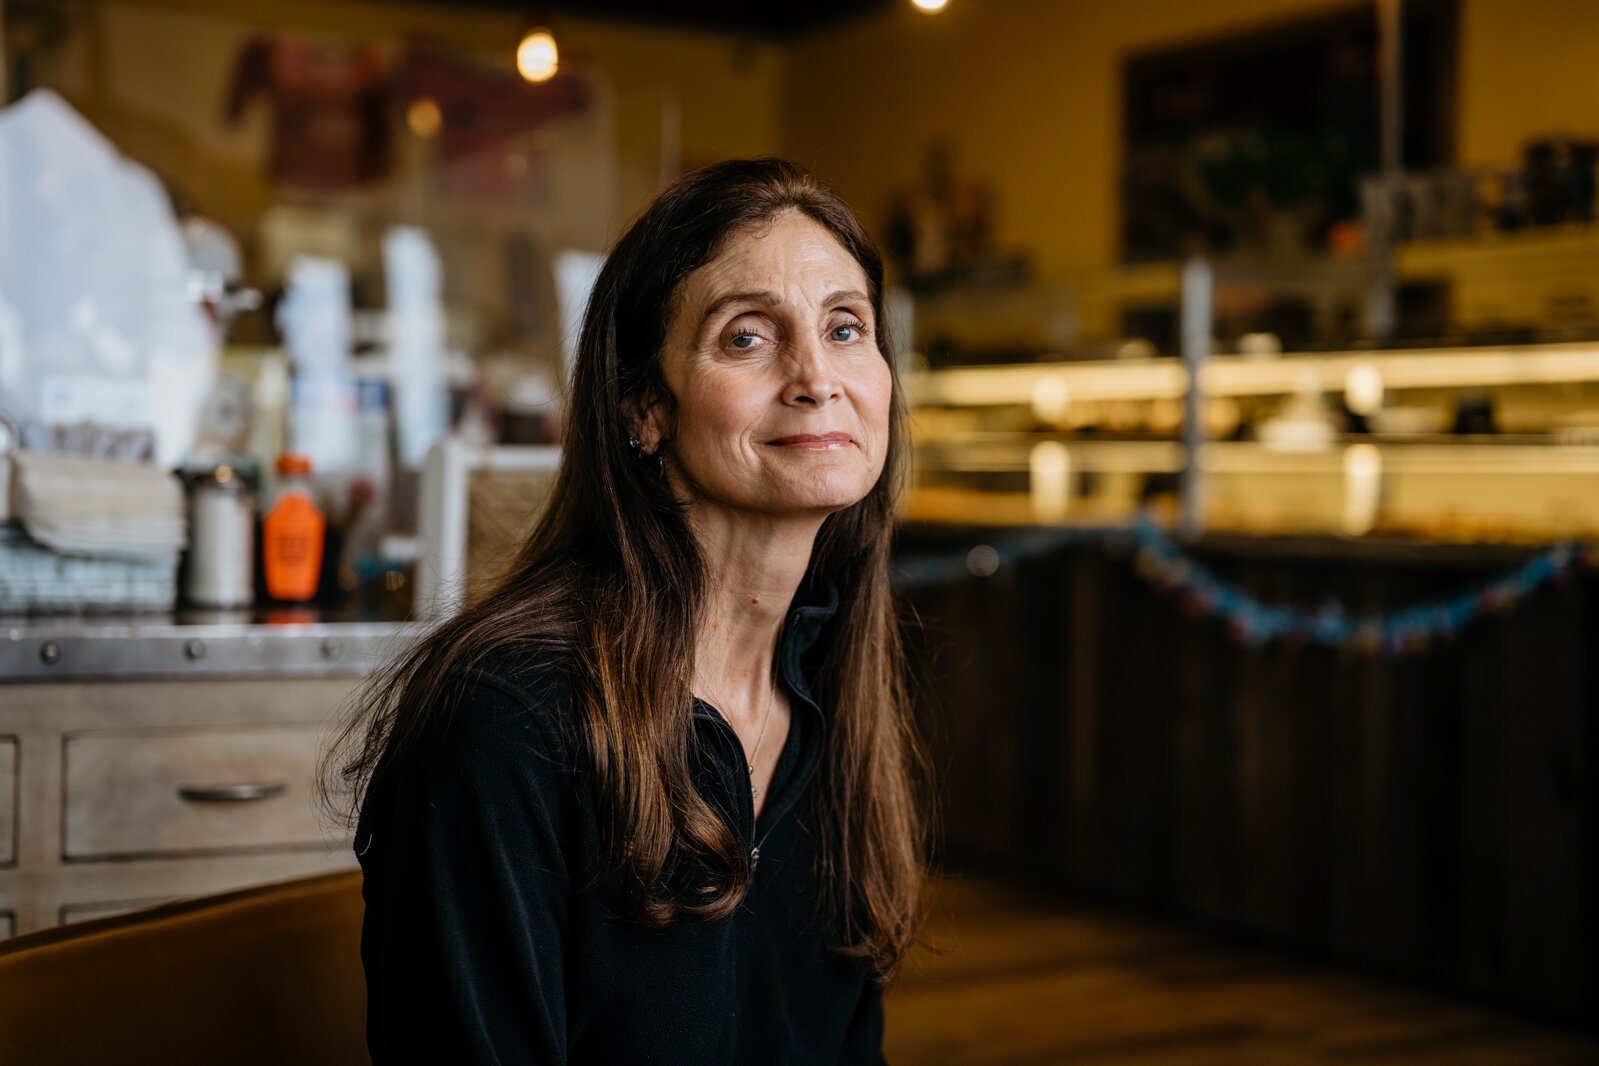 "I usually get a lot of requests from parents for cakes or parties because of allergies or special diets," says vegan baker Maria Kattula.